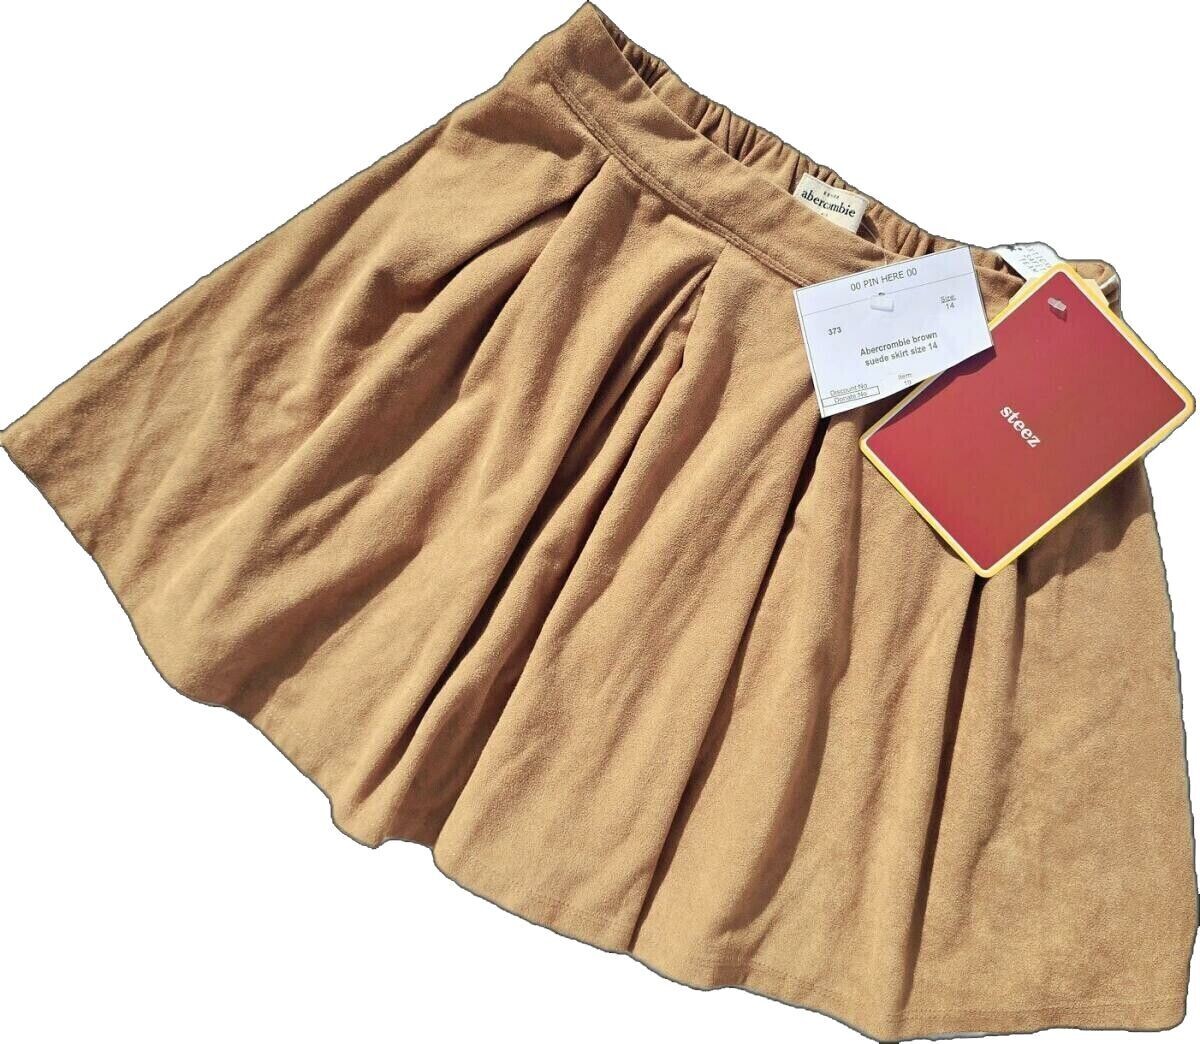 New Abercrombie Kids Brown Suede Skirt